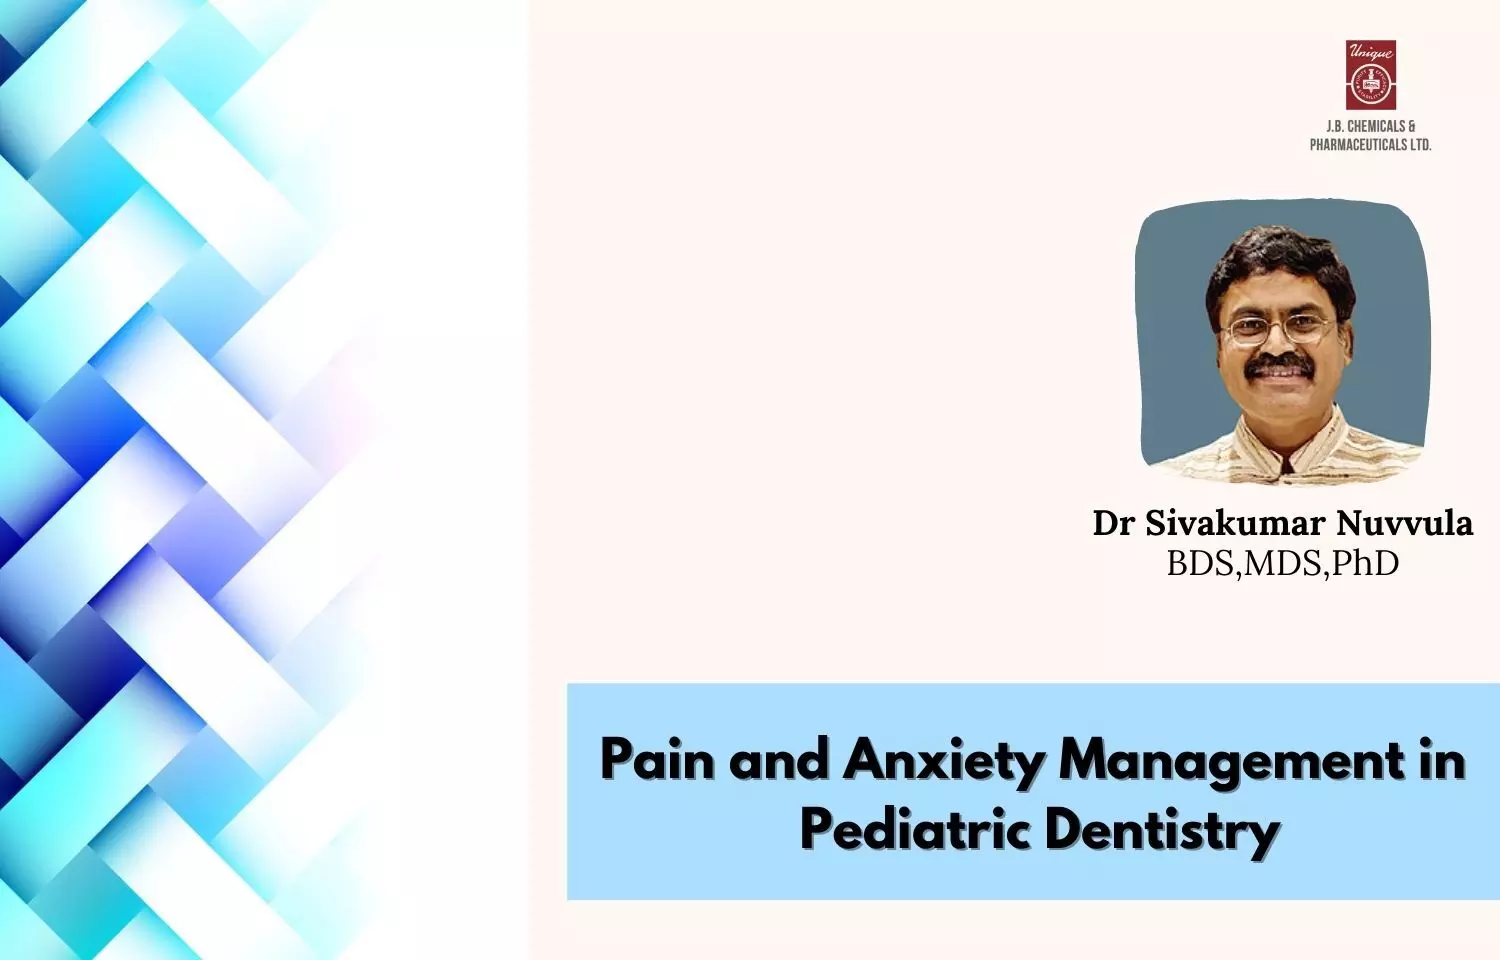 Pain and Anxiety Management in Pediatric Dentistry